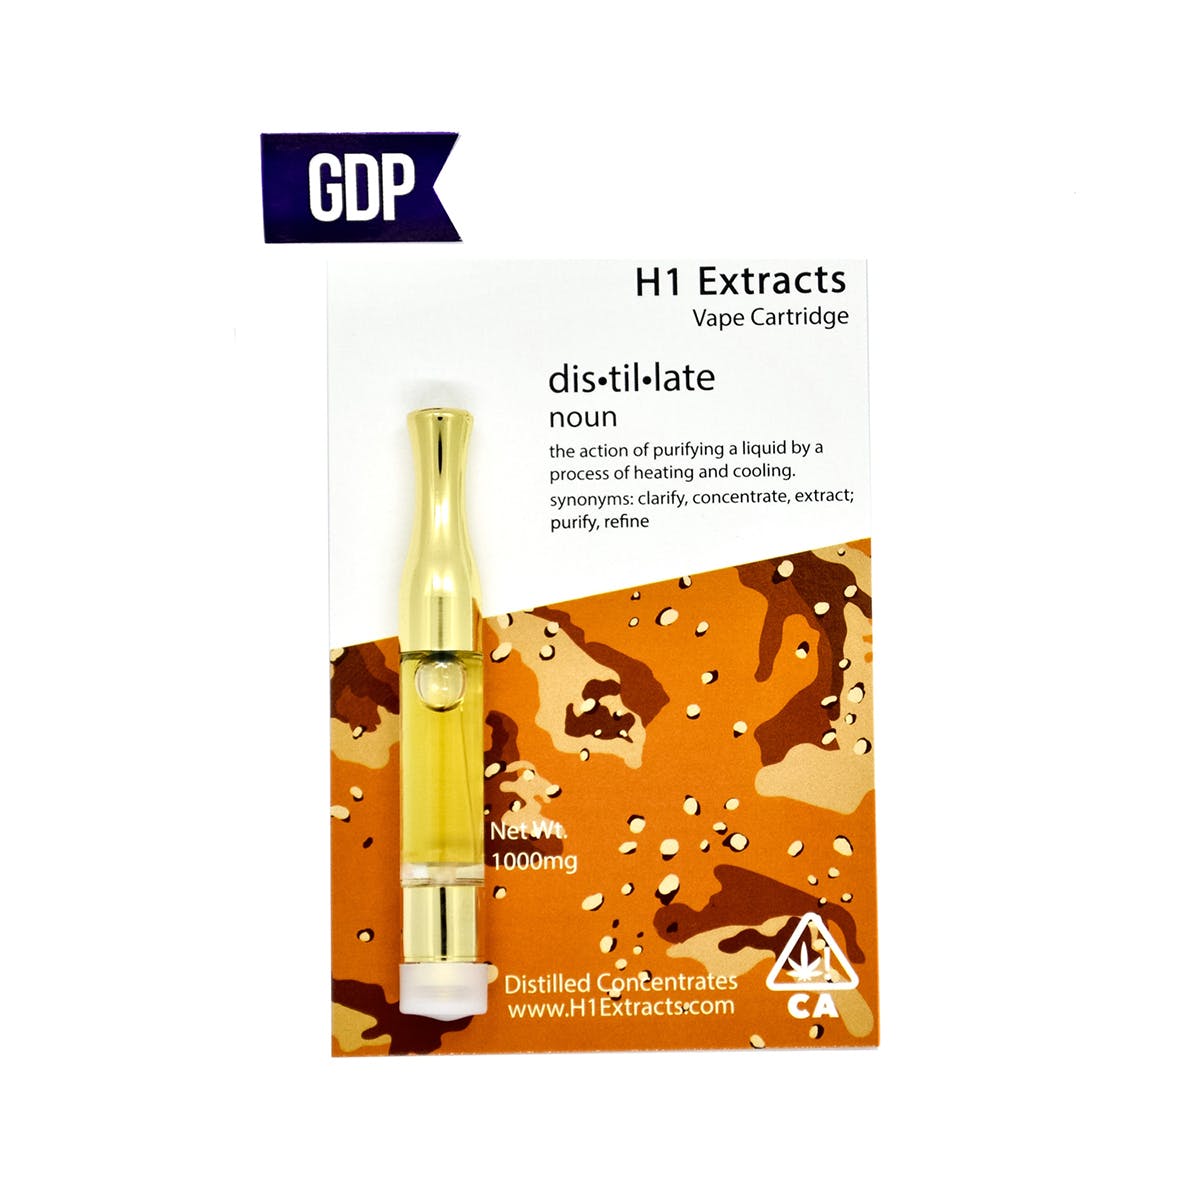 concentrate-h1-extracts-classic-gdp-cartridge